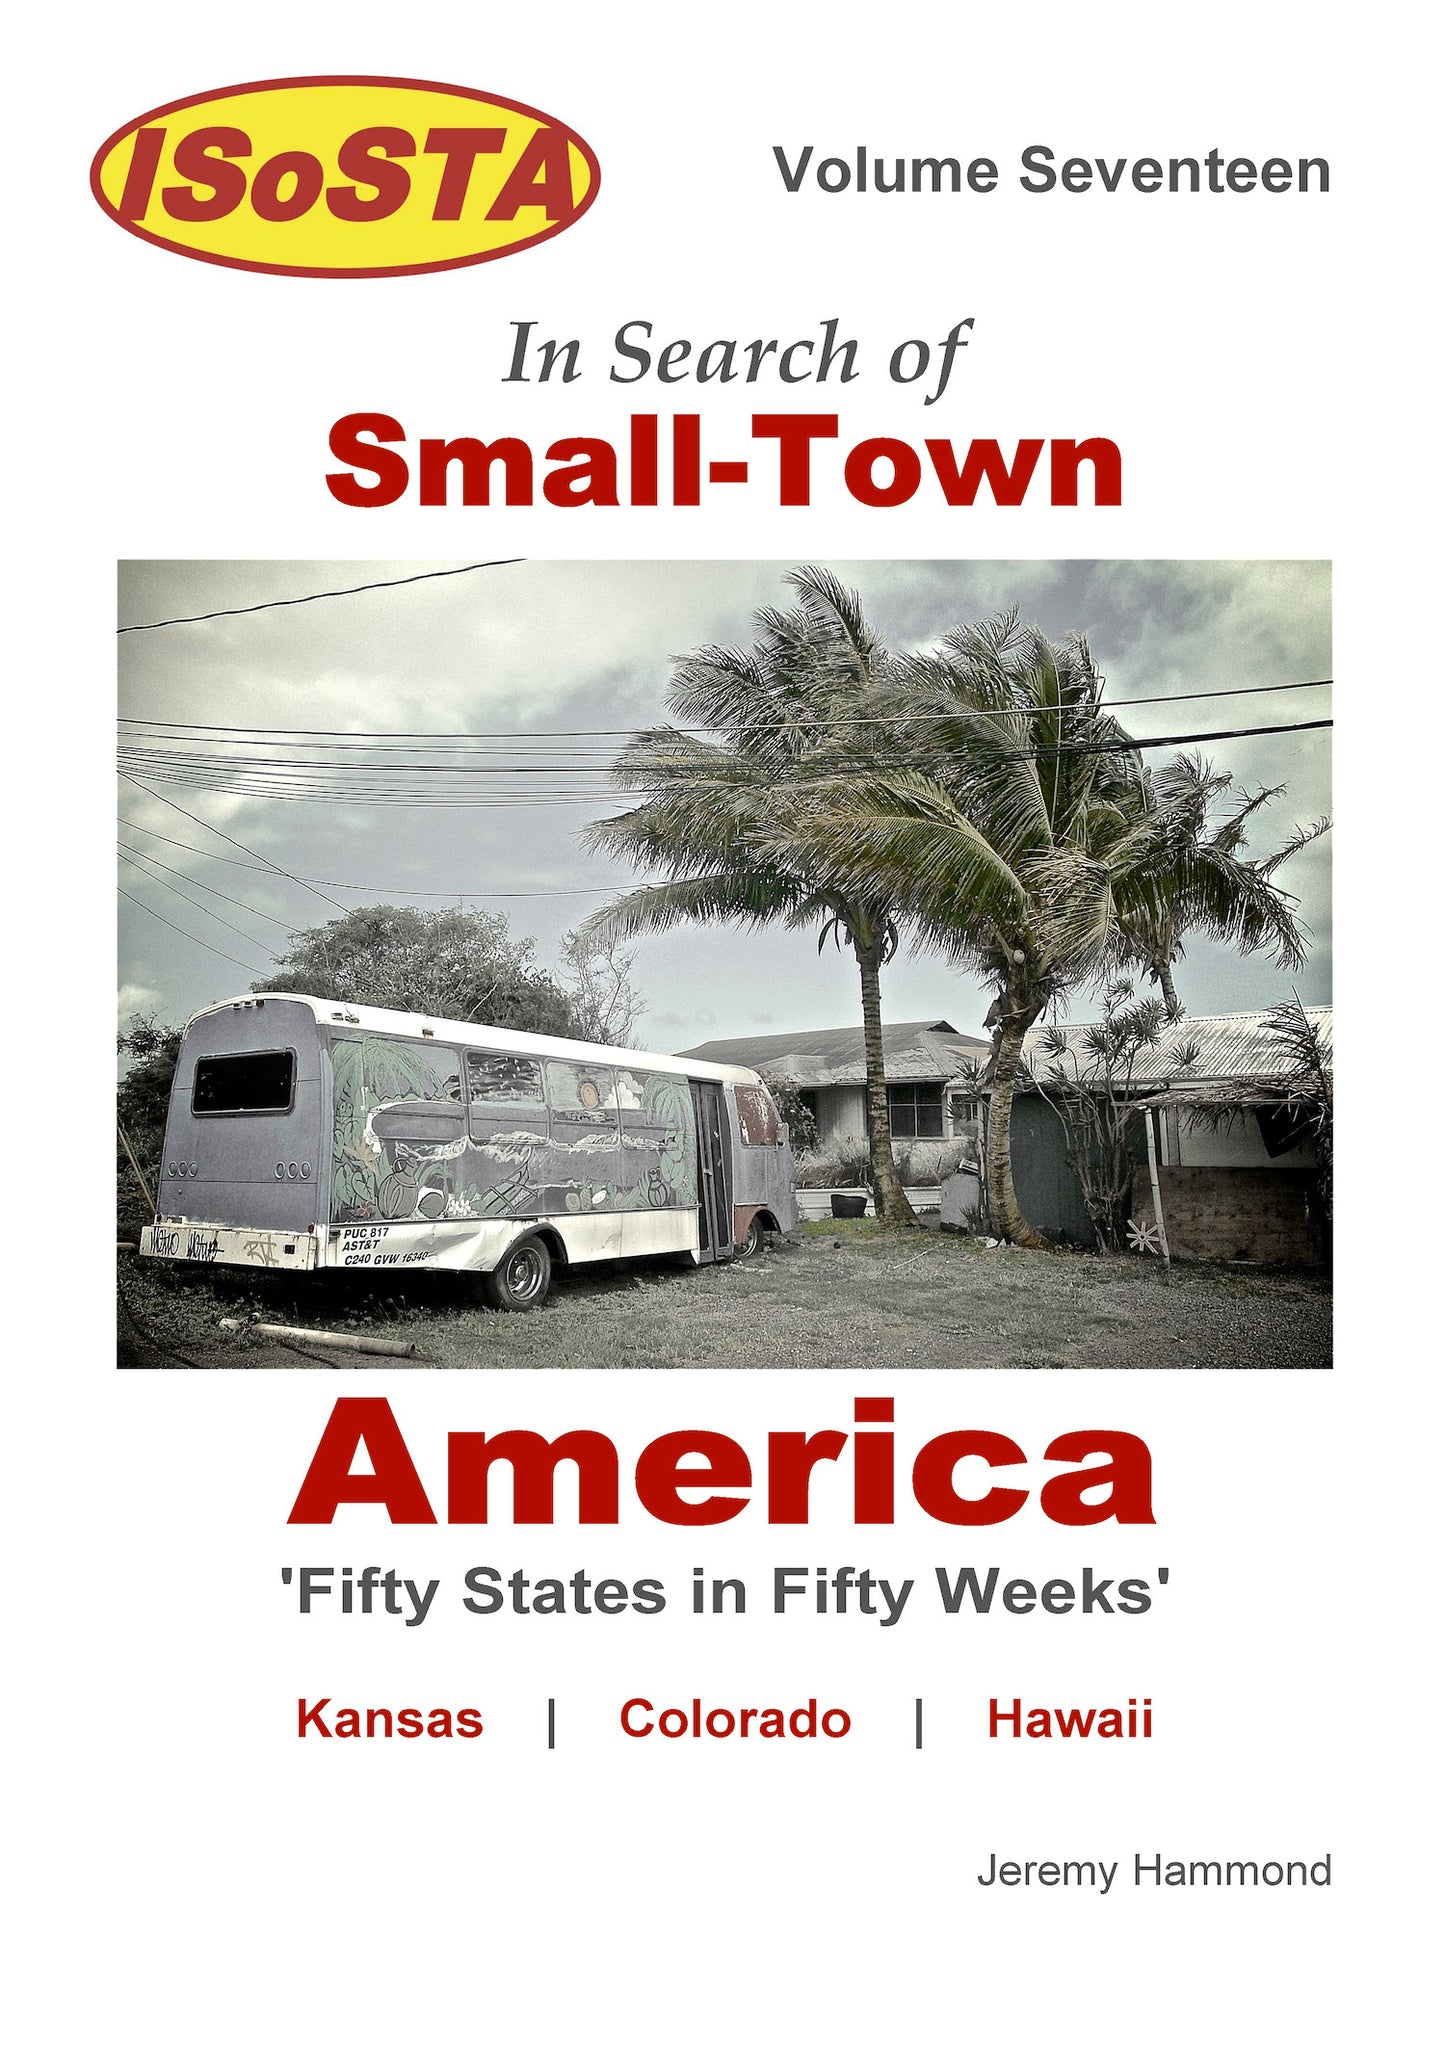 In Search of Small-Town America: Volume 17